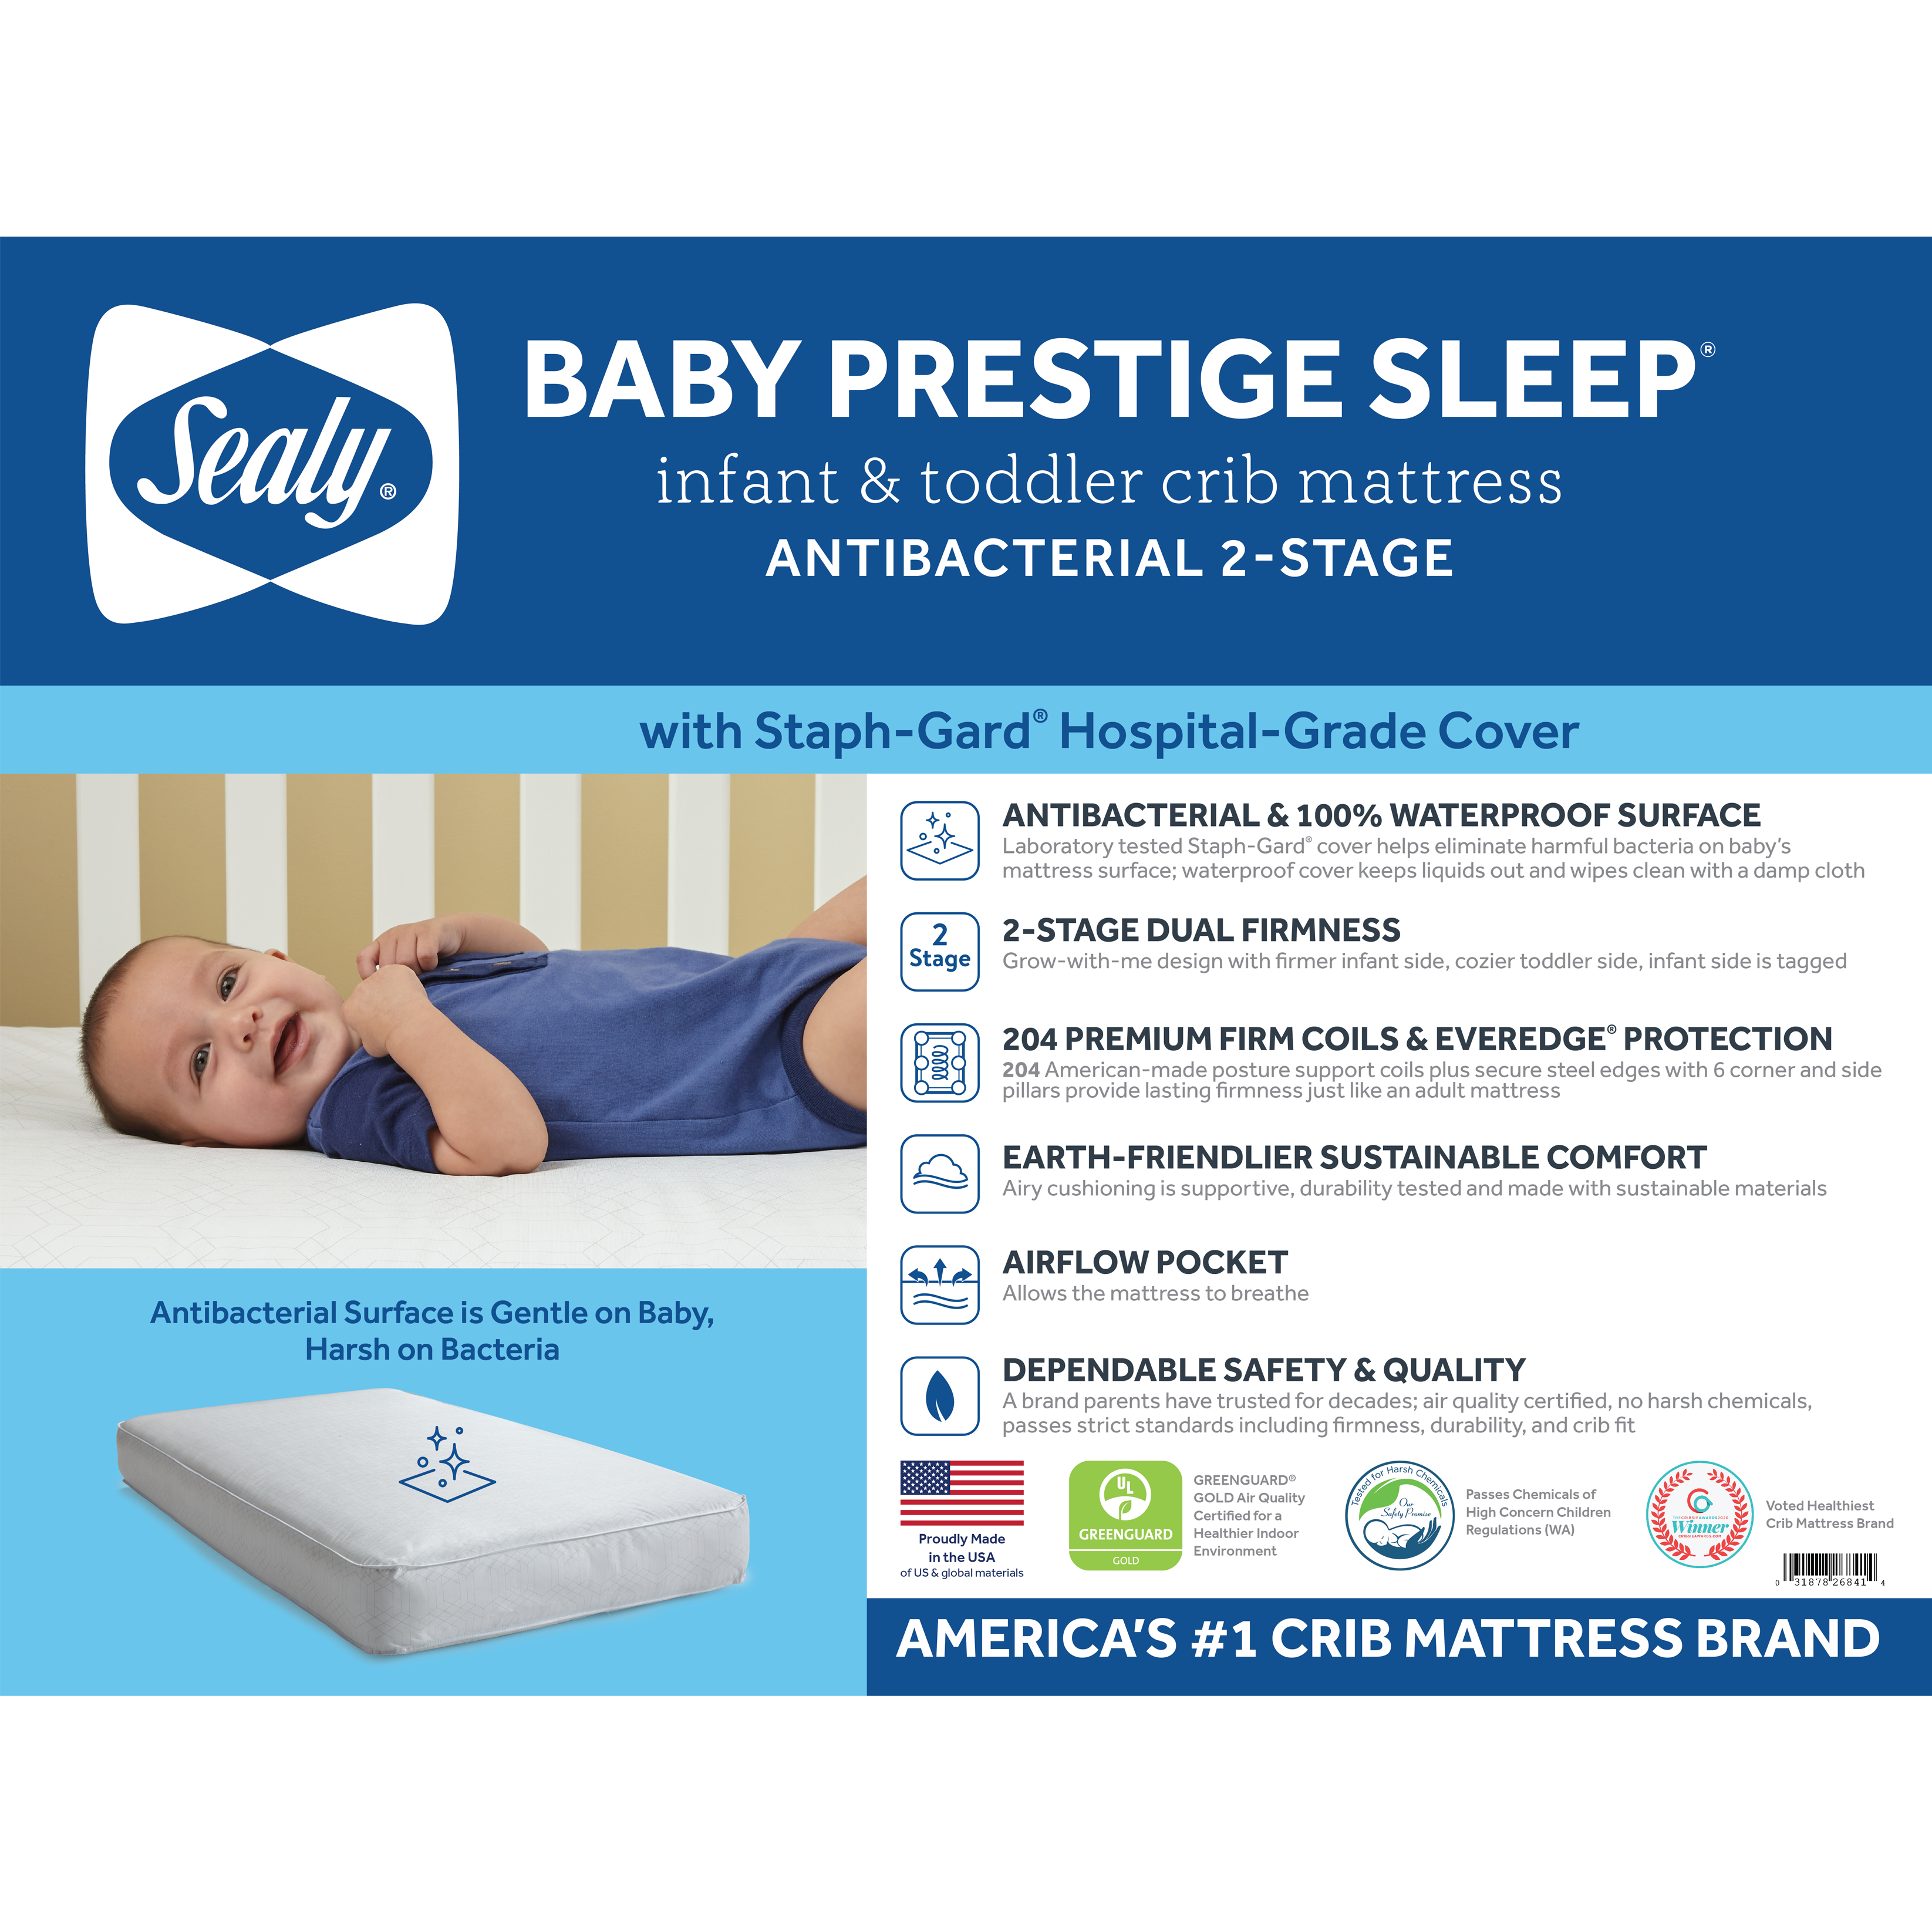 Sealy Baby Prestige Sleep Ultra-Premium 2-Stage Antibacterial, 204 Coil, Baby Crib & Toddler Mattress - image 3 of 16